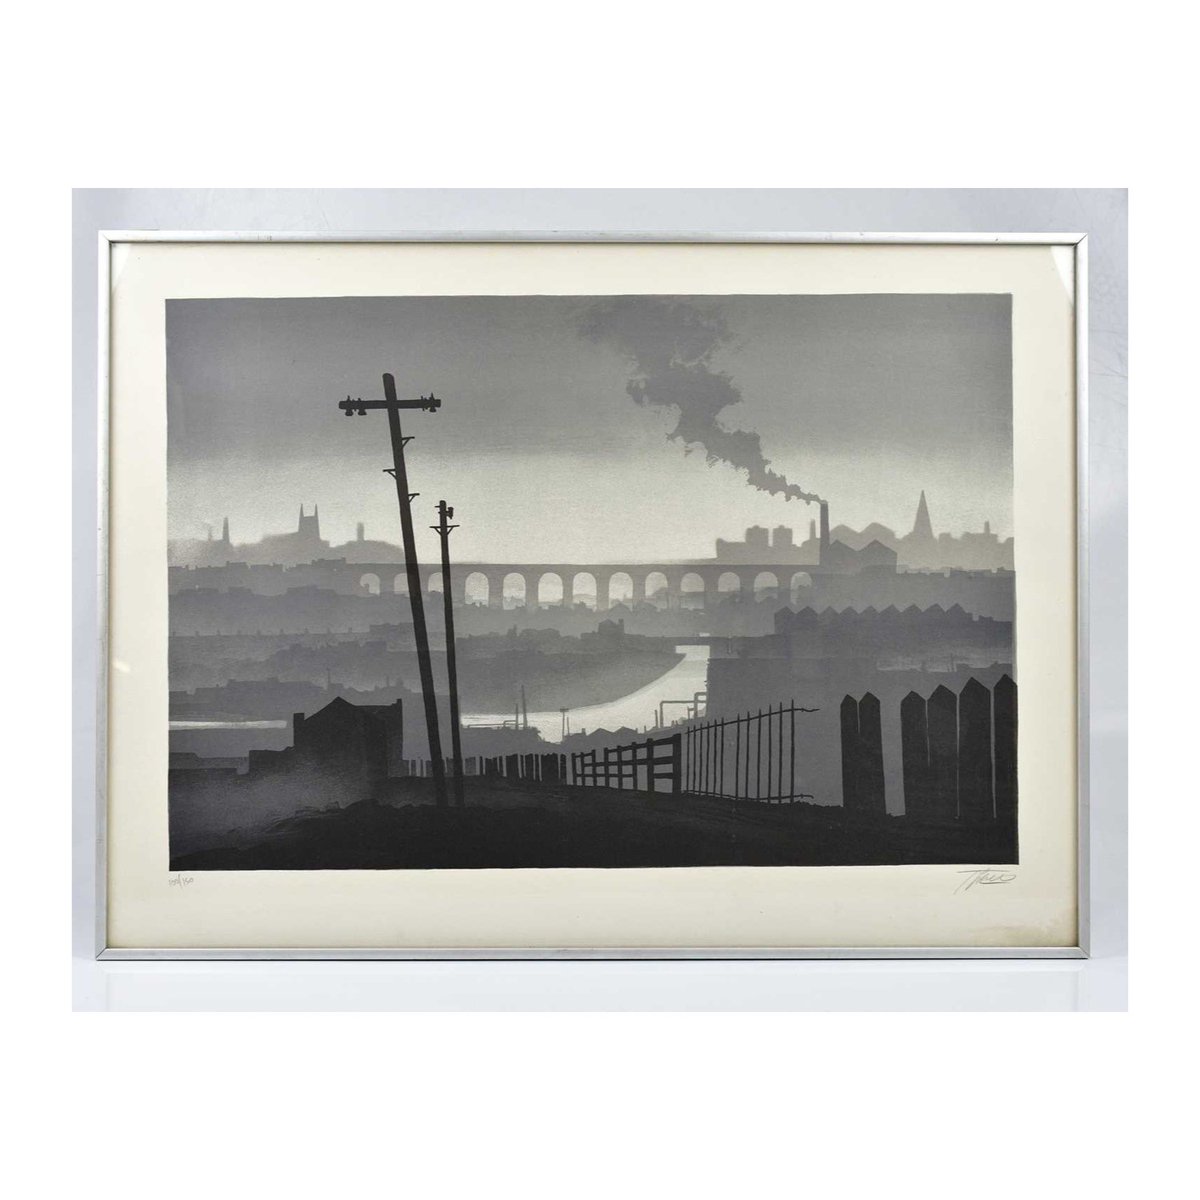 ~ Northern and Fine Art ~ The Cheshire Saleroom
Auction starts today at 10am.
Lot 23 ~ TREVOR GRIMSHAW (1947-2001); pencil signed lithograph, 'The Viaduct', signed, no. 100/150, 55 x 76cm, framed. Estimate £400 - £600
@apauctioneers 
#trevorgrimshaw bit.ly/463TRbP